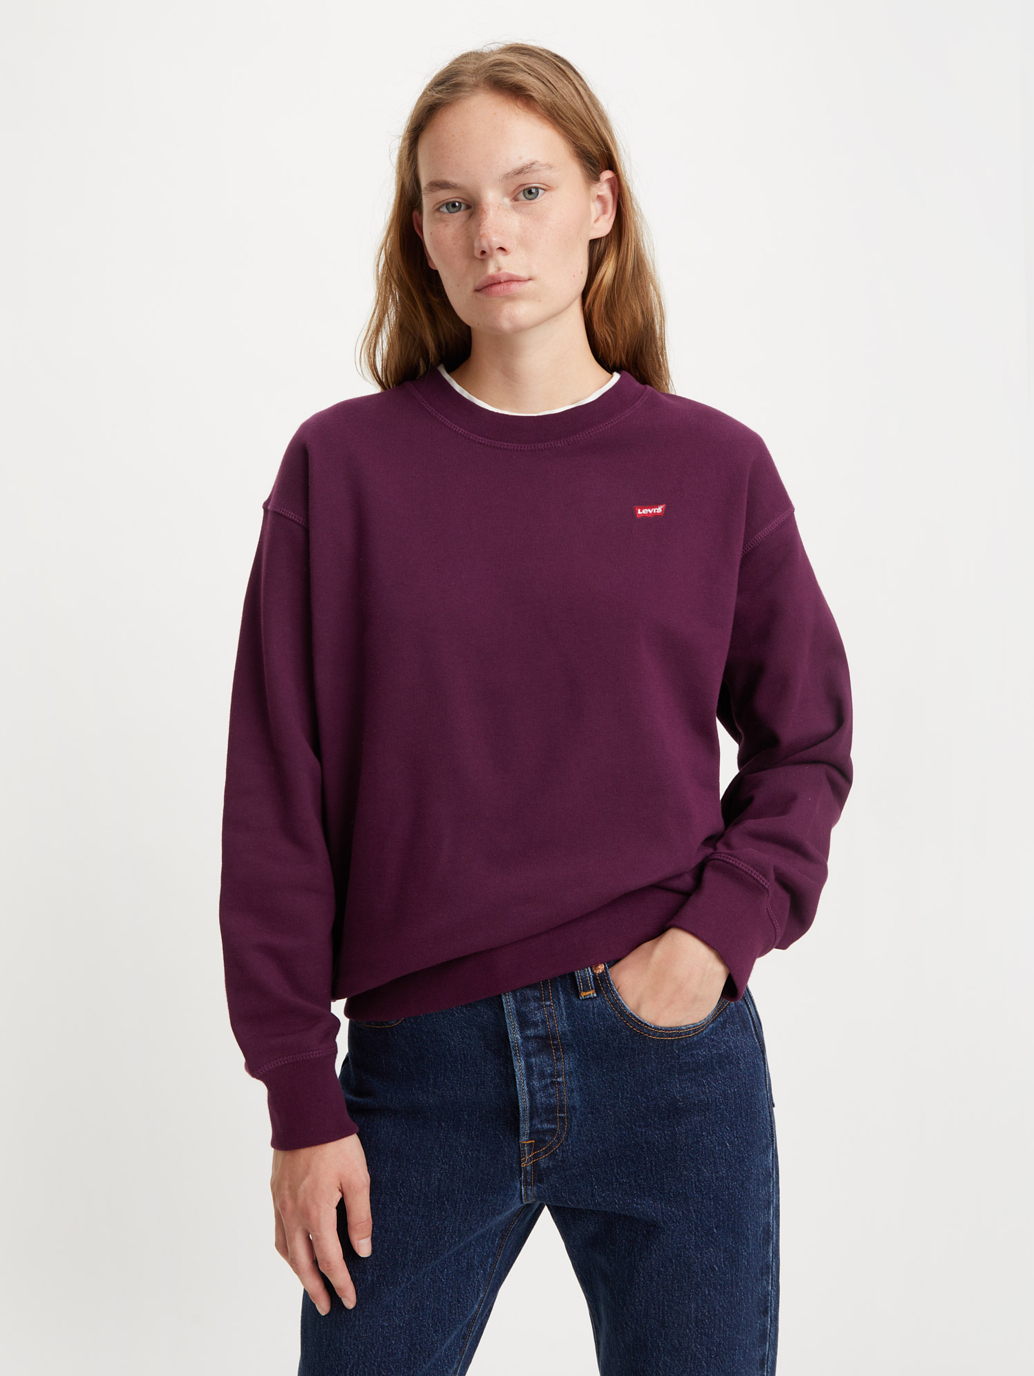 Women’s Apparel: Down Blouse, Puff Sleeve Tops & More | Levi’s® PH